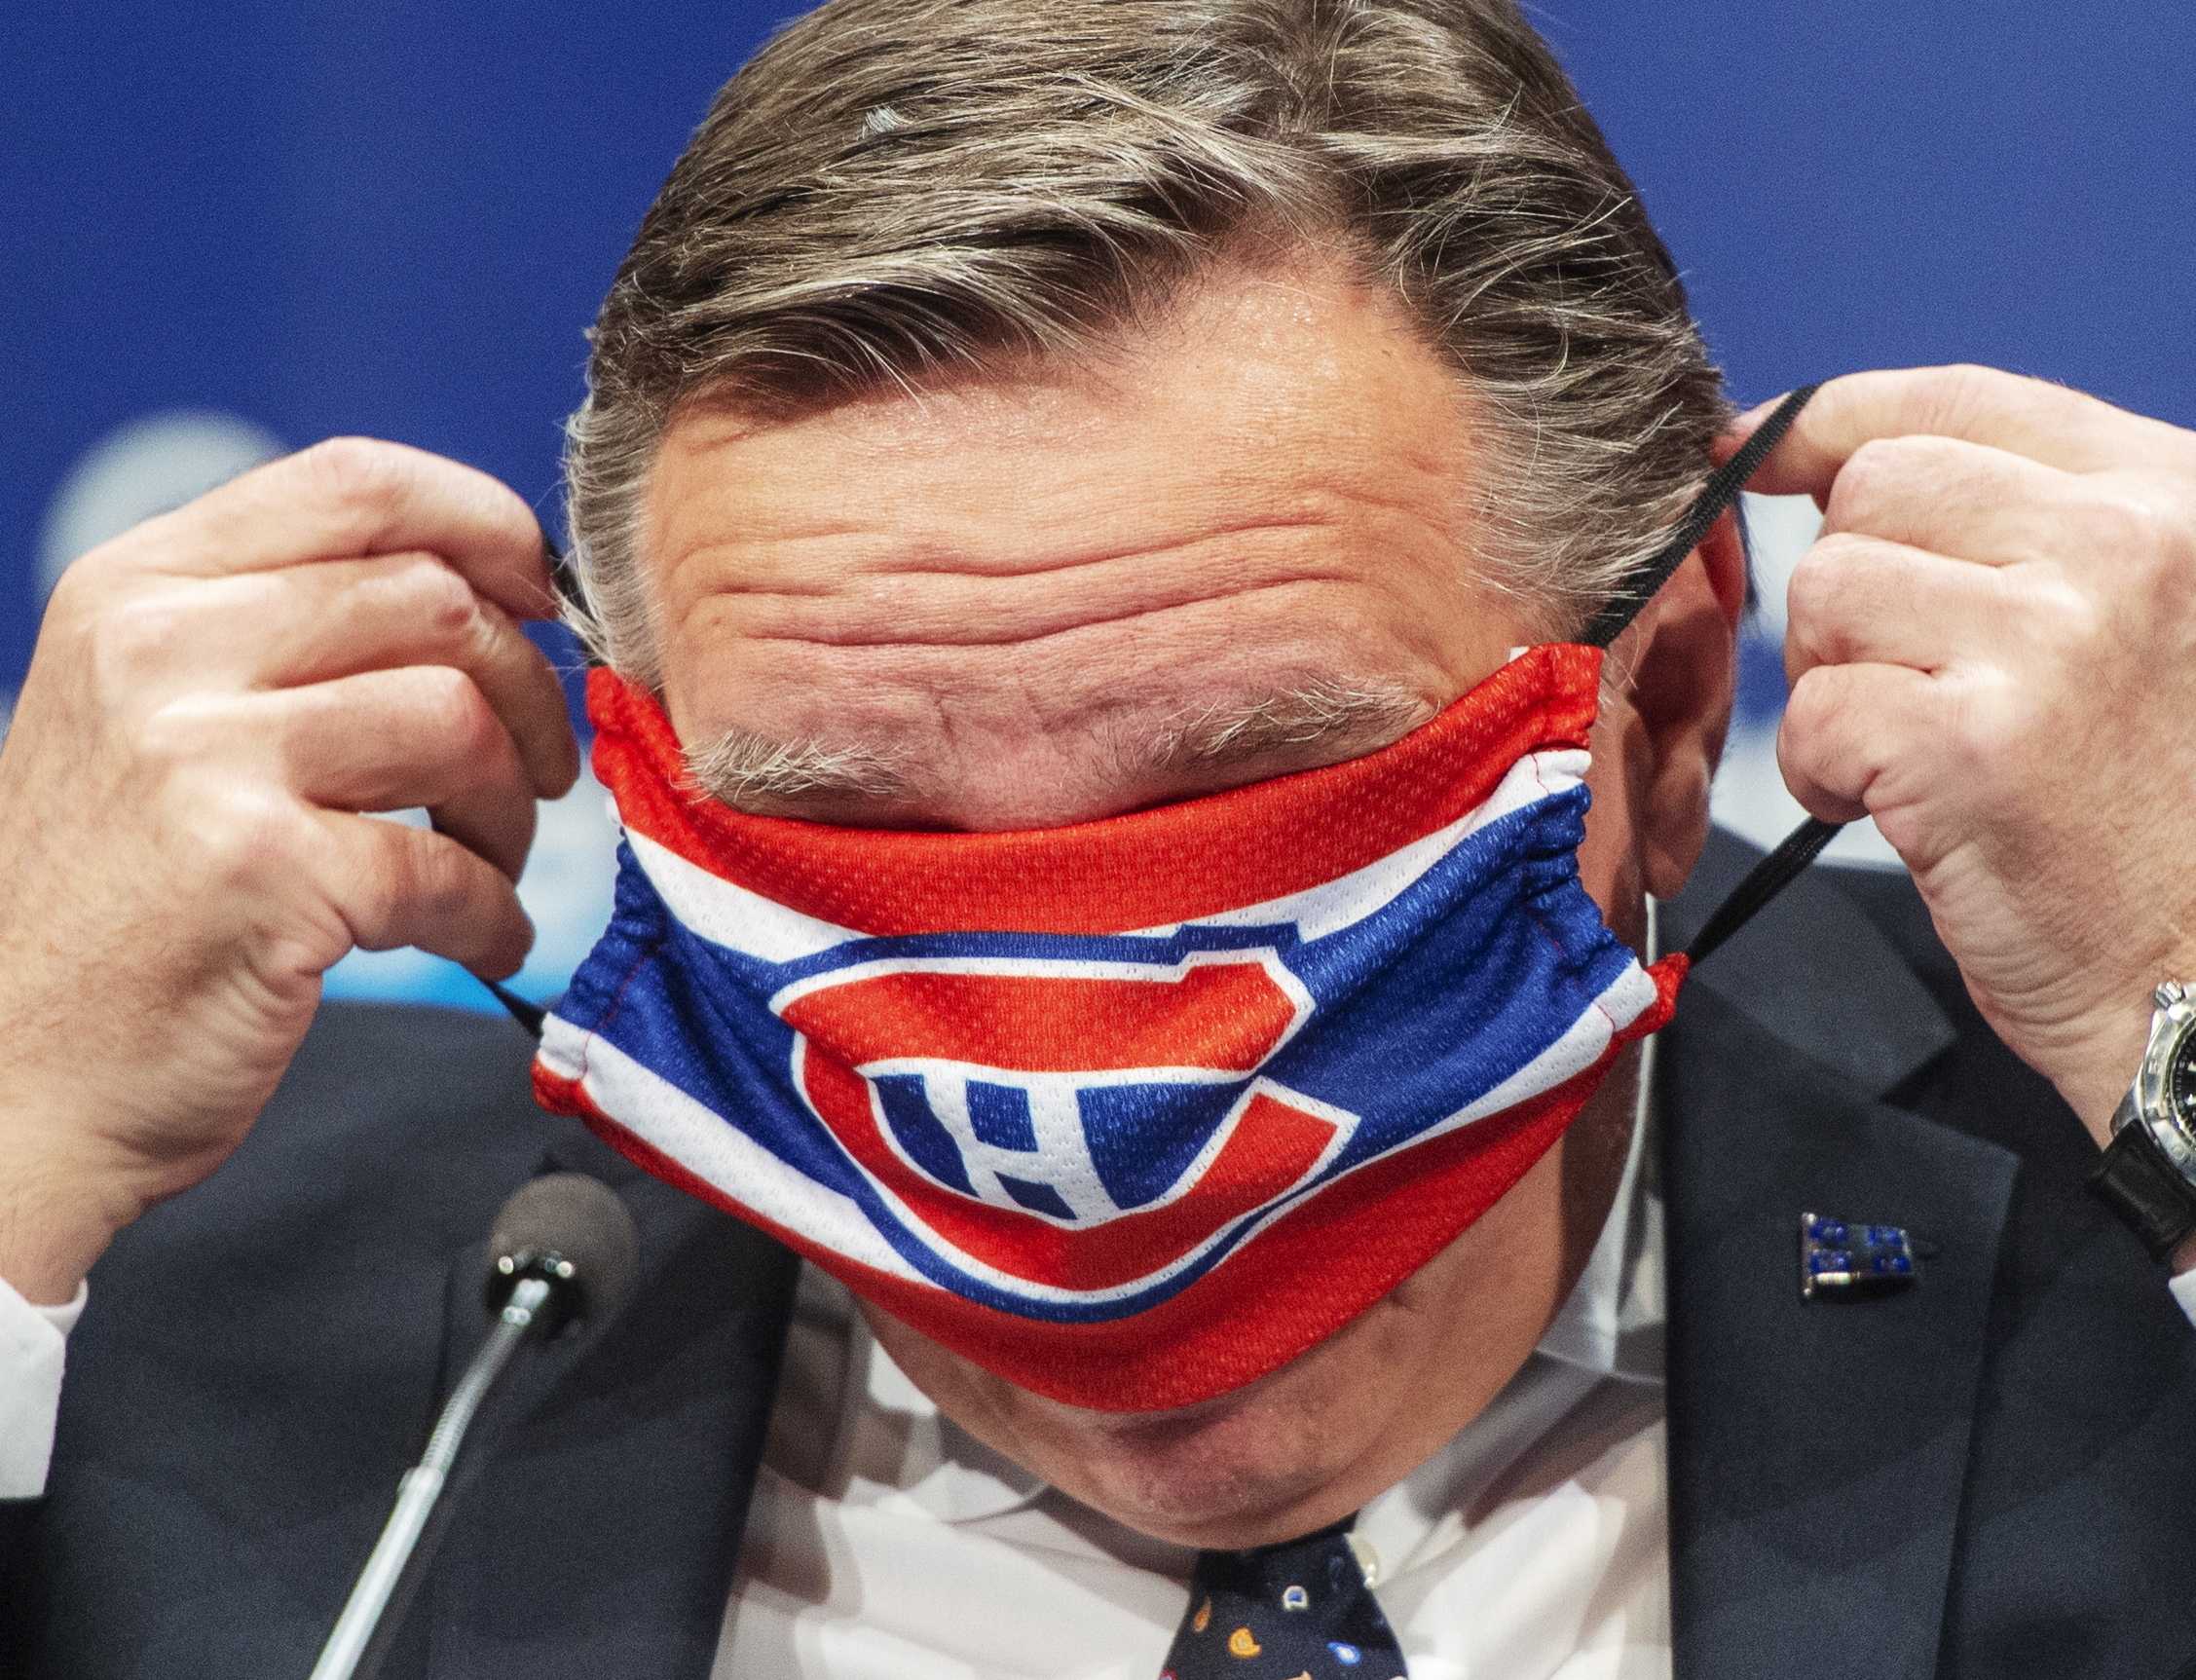 Photo of Legault putting on a Habs mask but seeming to have difficulty as the mask is covering his eyes.